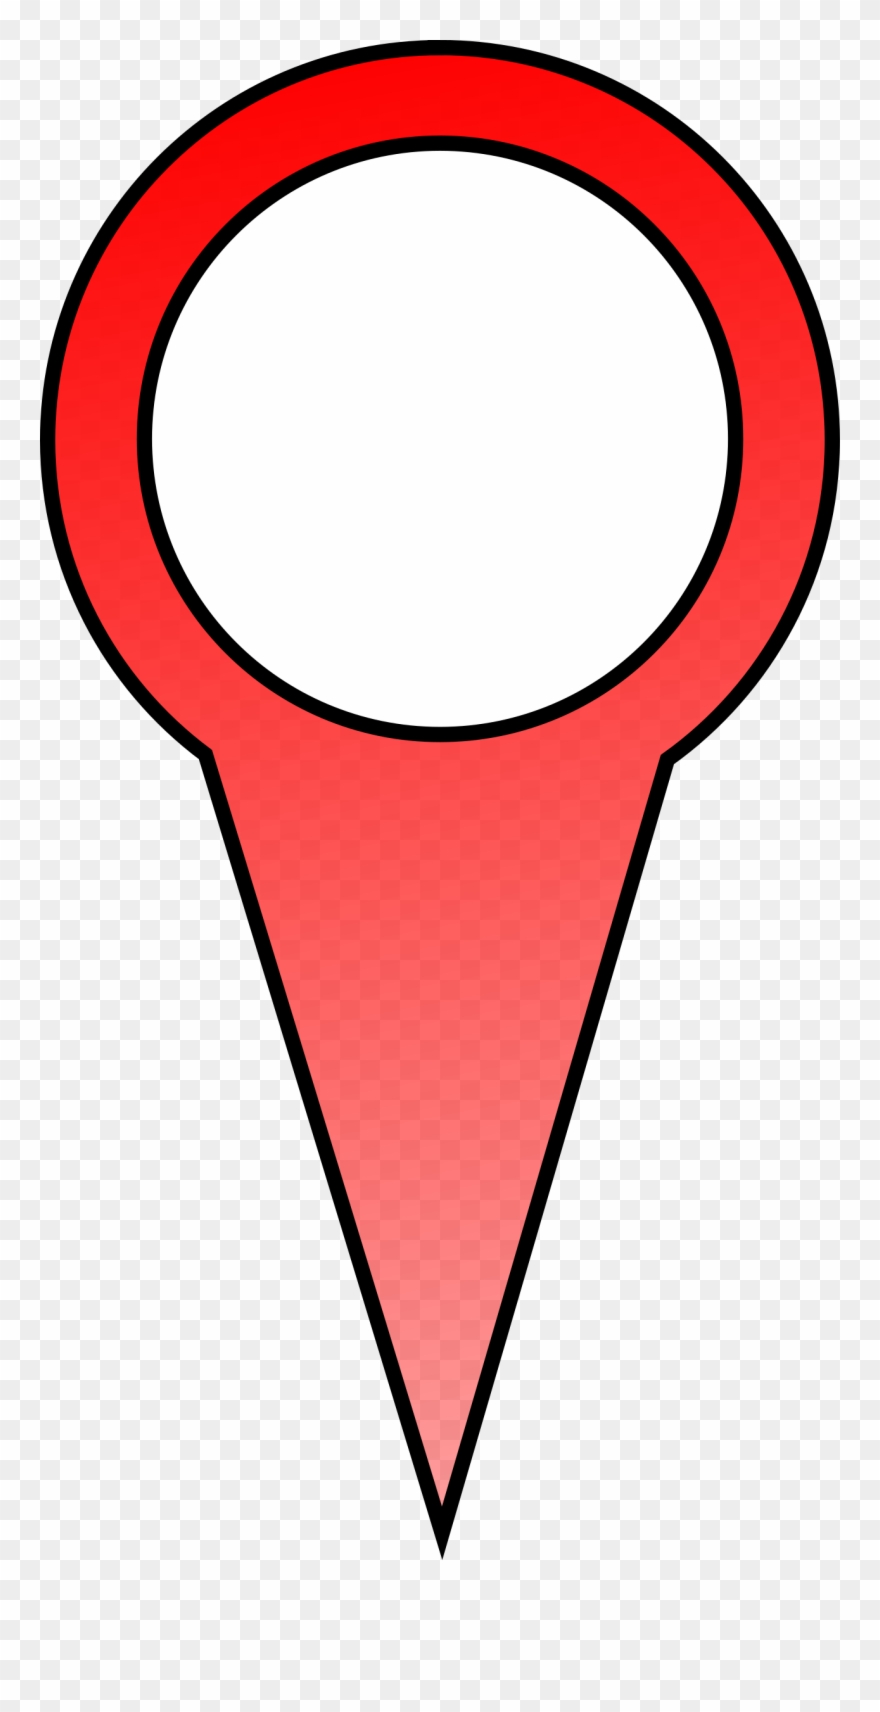 This Free Clip Arts Design Of Red Map Pin